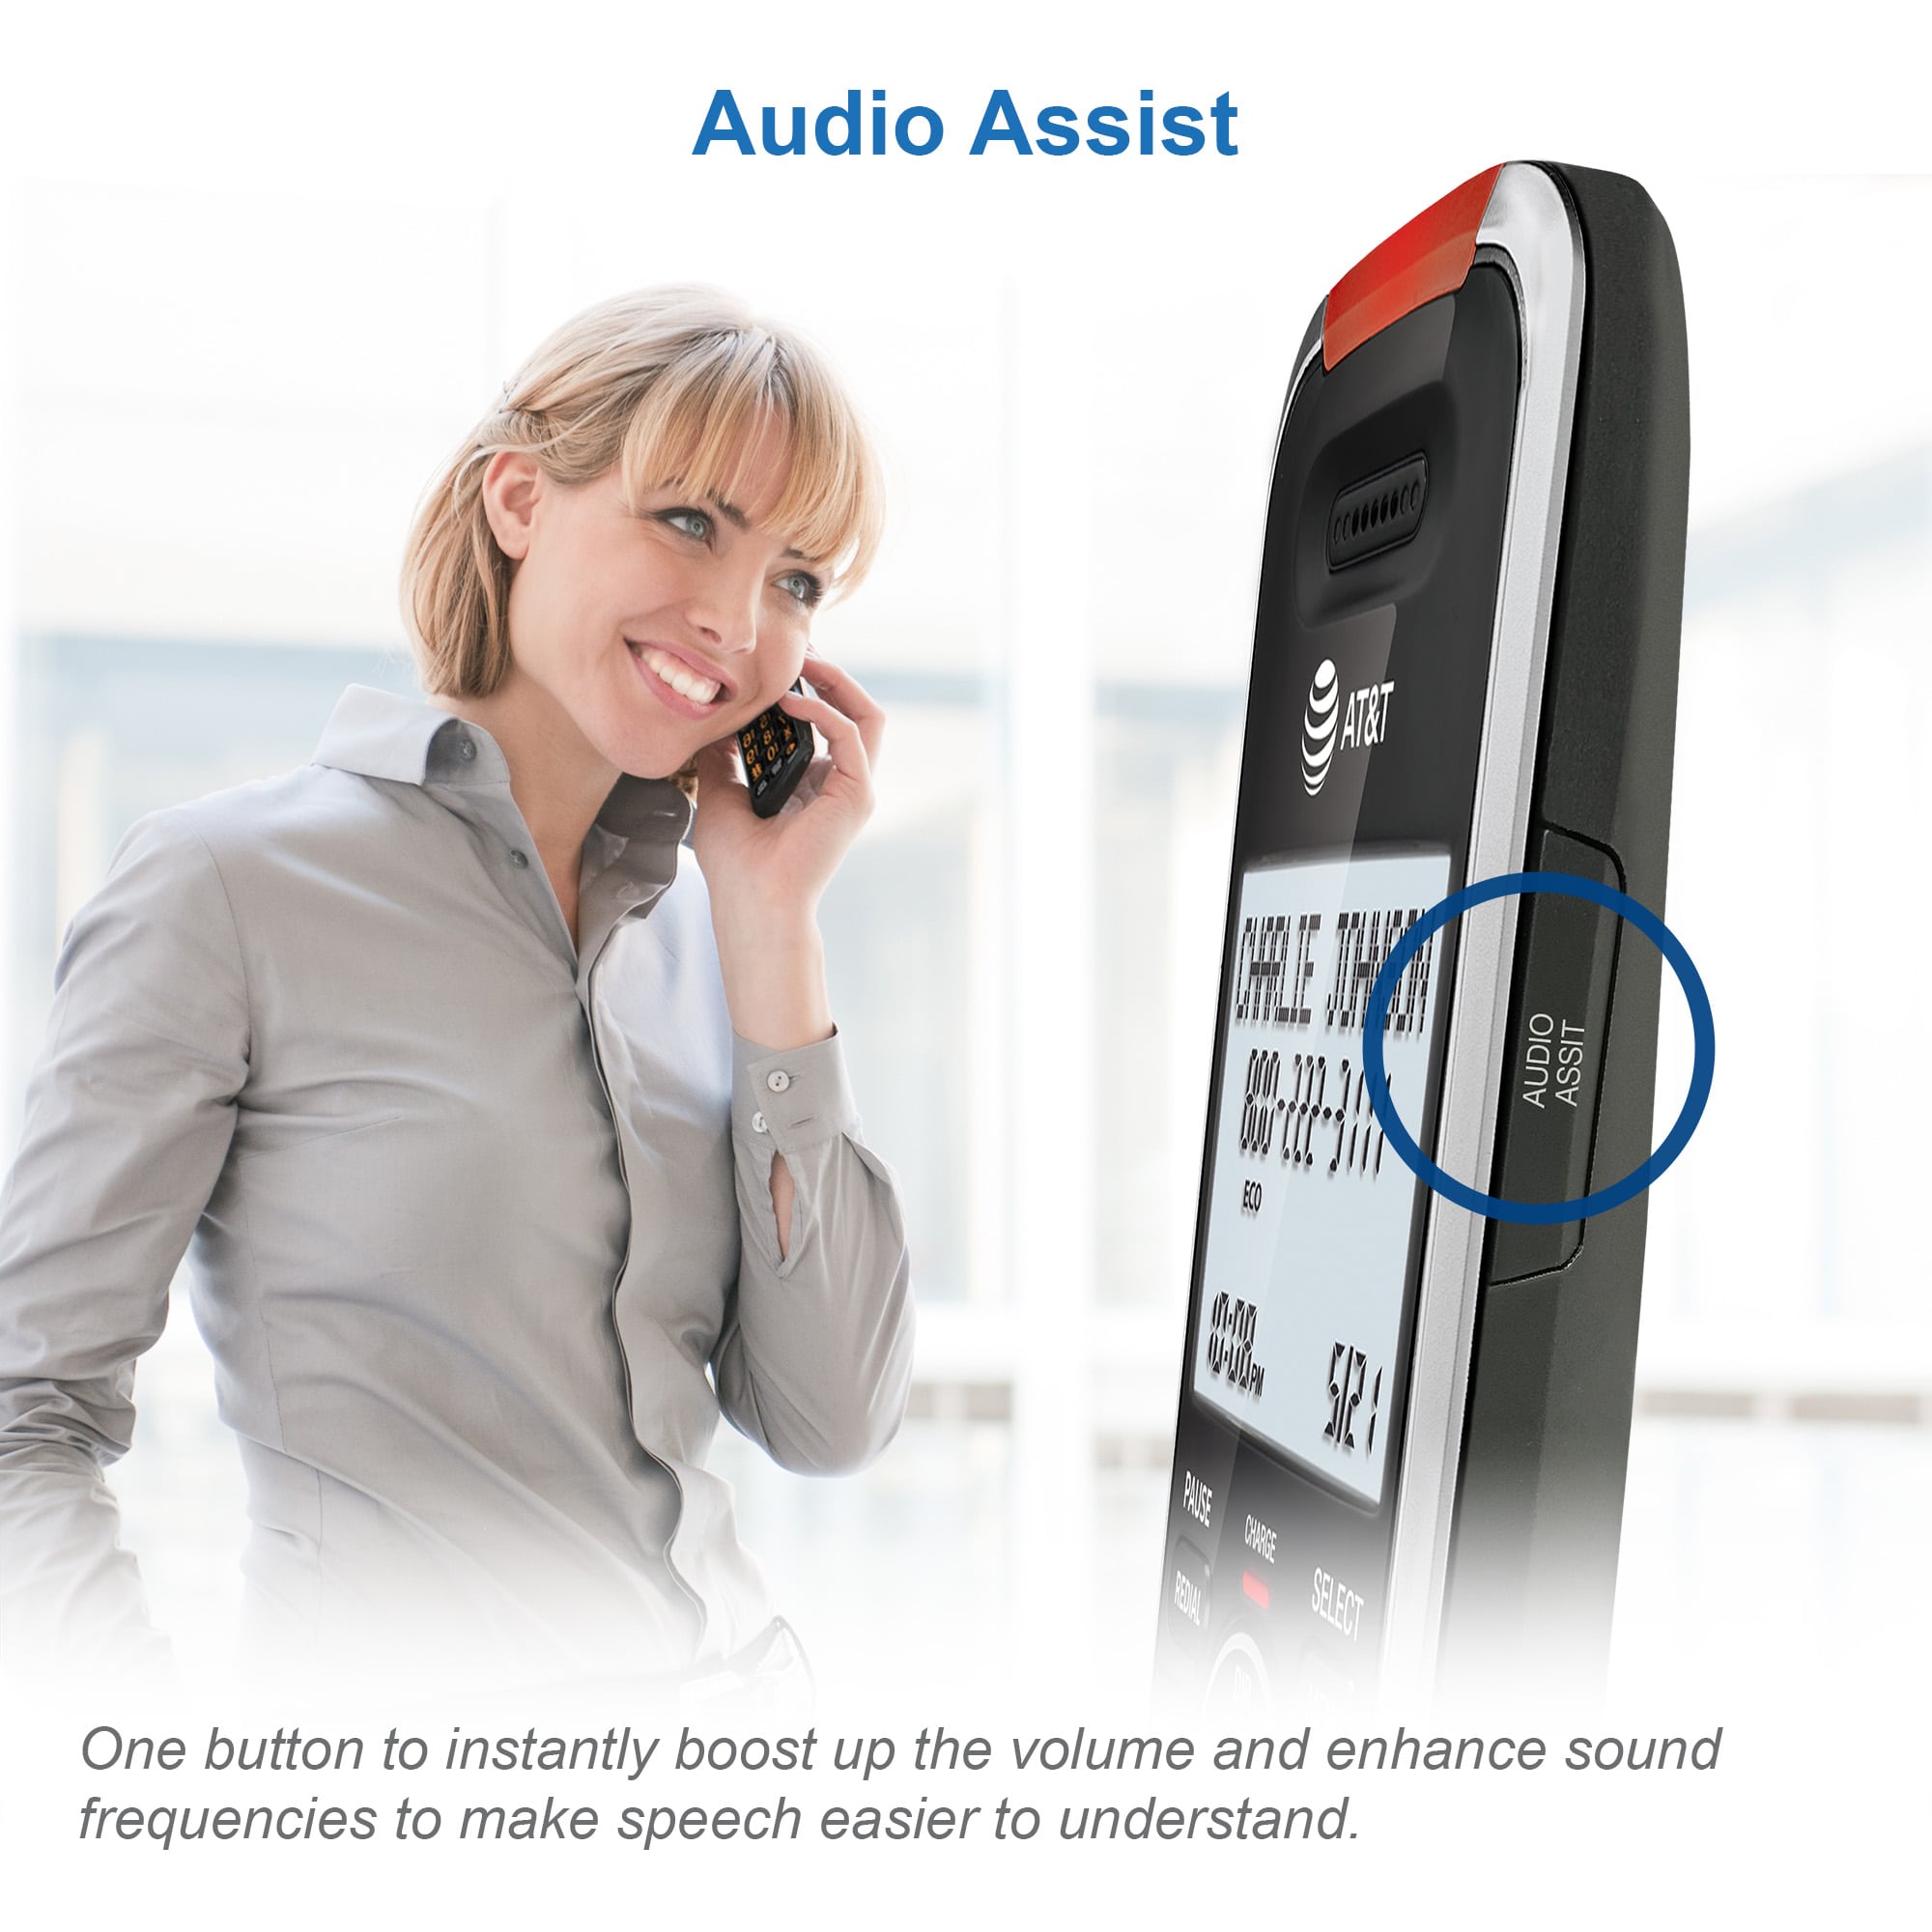 3-Handset Cordless Phone with Unsurpassed Range, Smart Call Blocker and Answering System - view 9